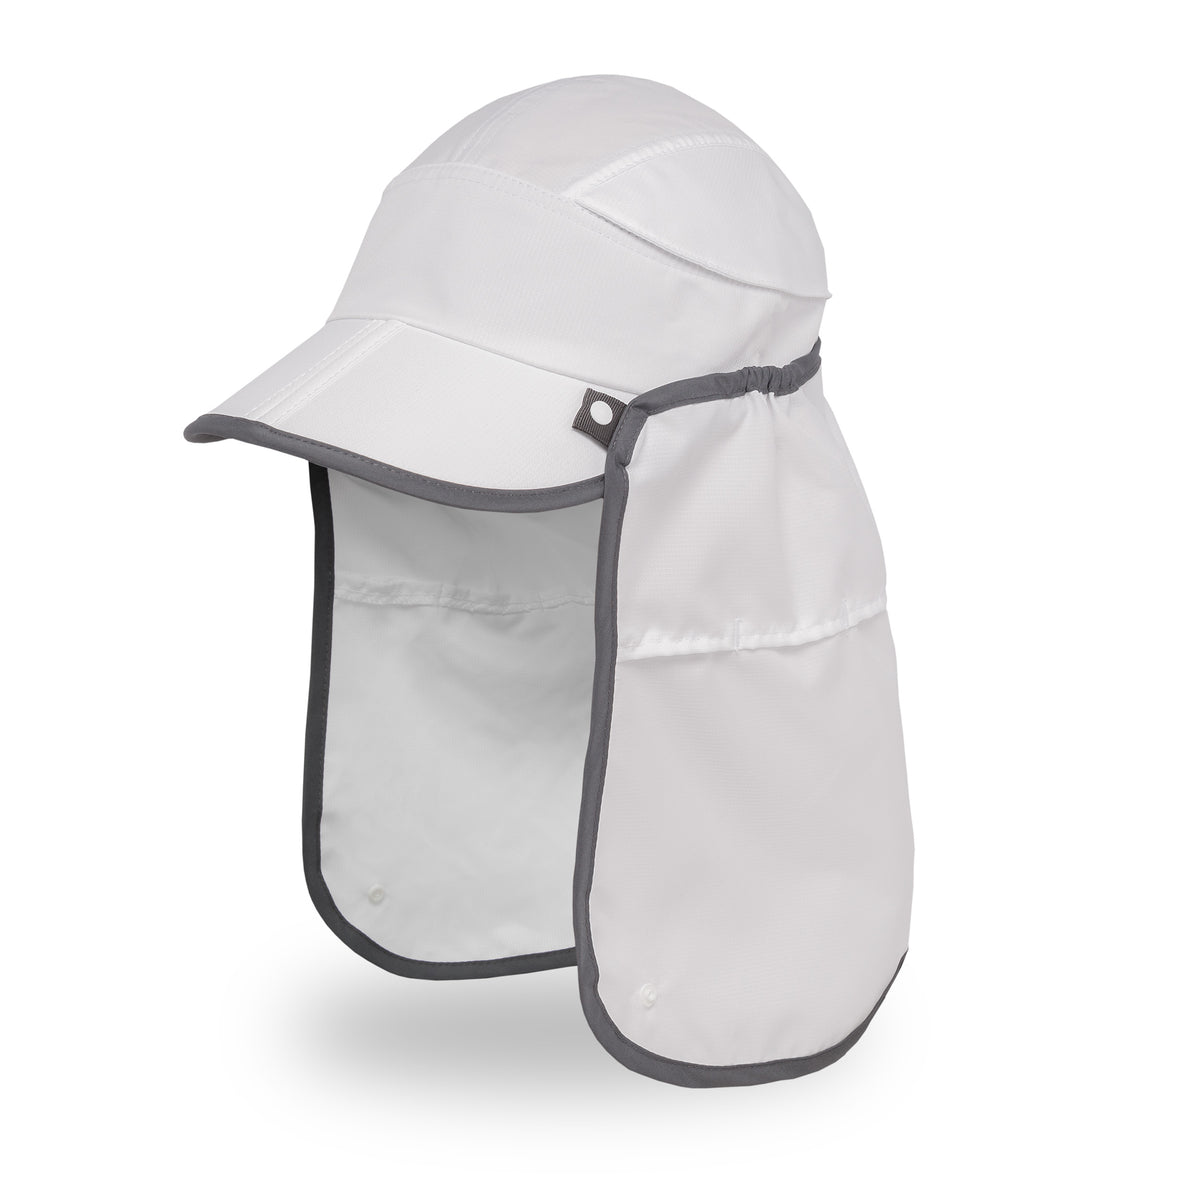 Sunday Afternoons Sun Guide Cap (Quarry, L/XL)